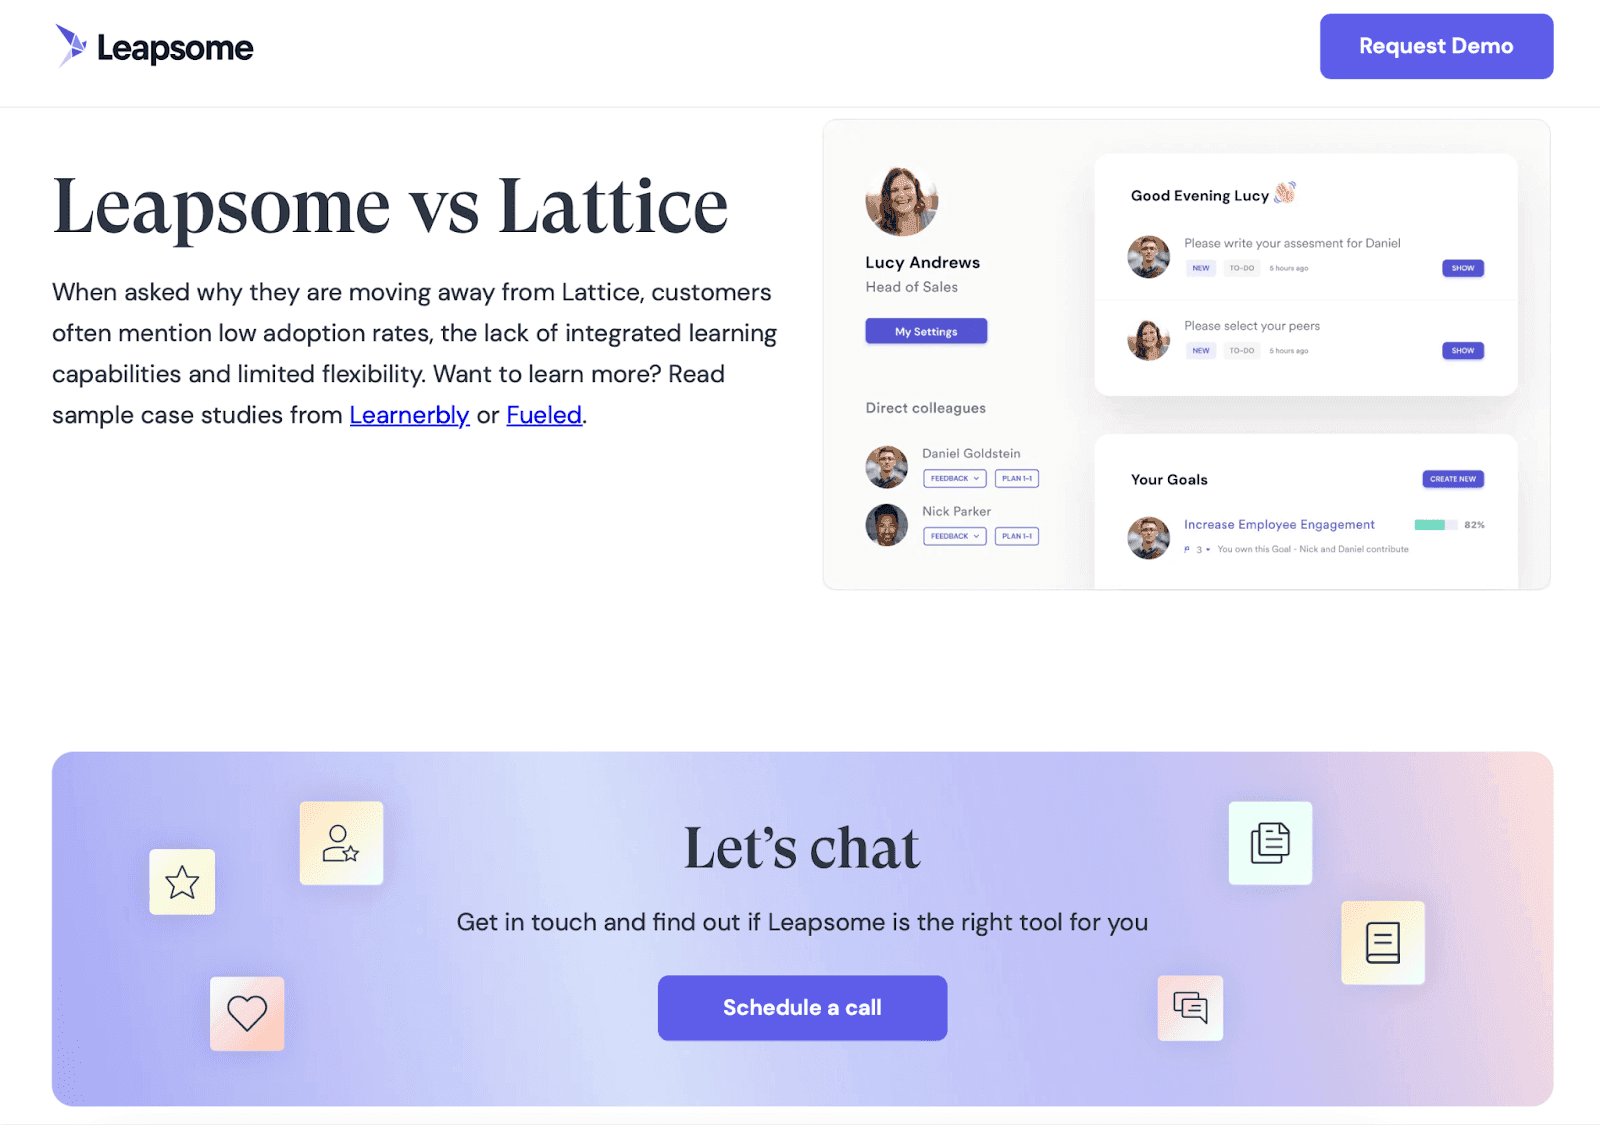 Leapsome comparison page between Leapsome and Lattice